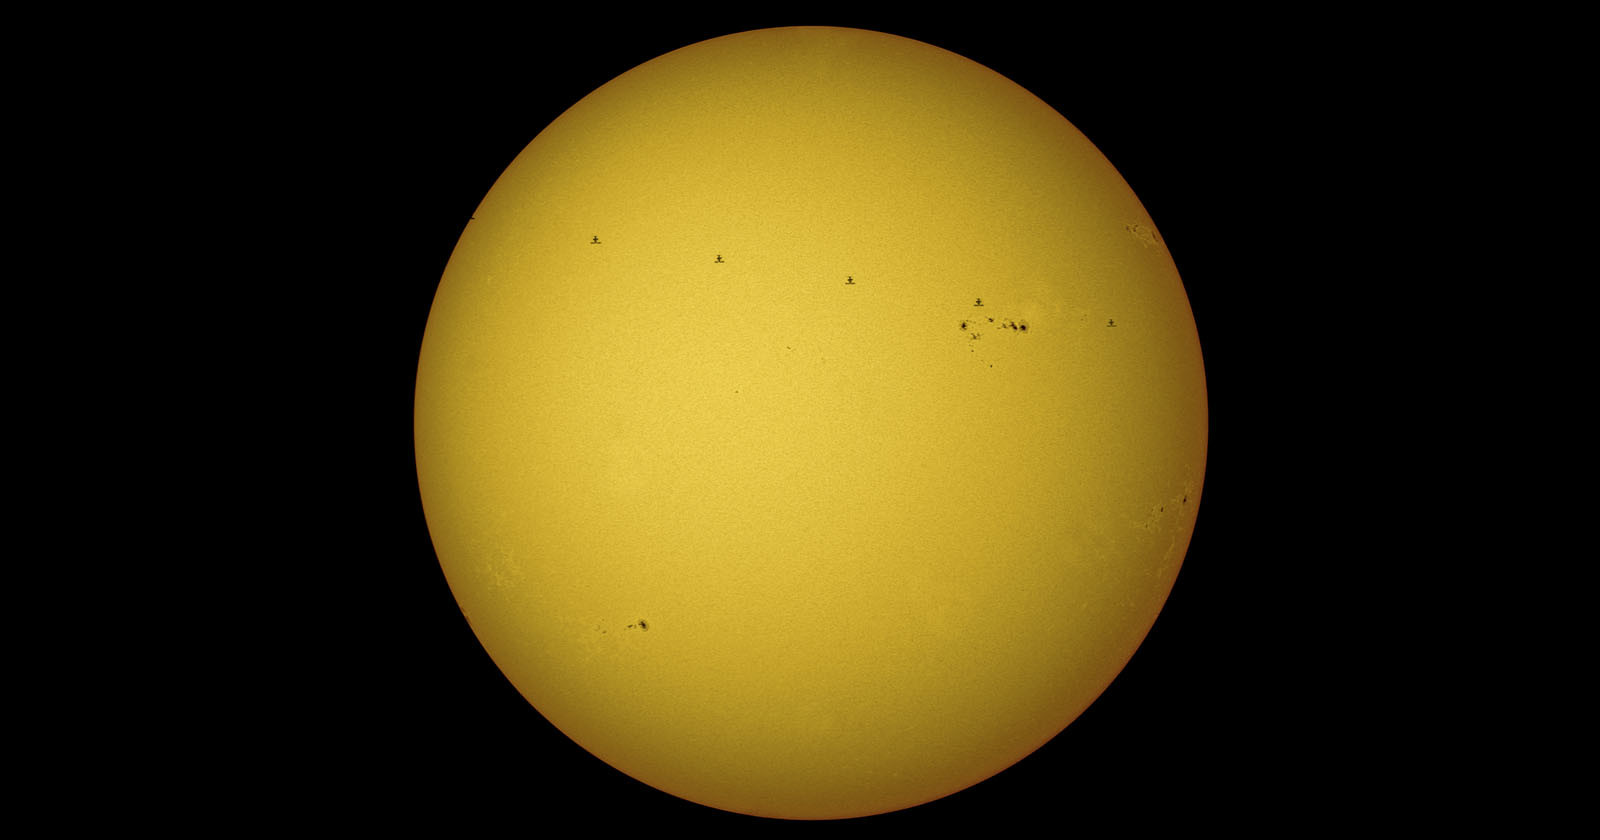  photo space station crossing sun nabbed just 